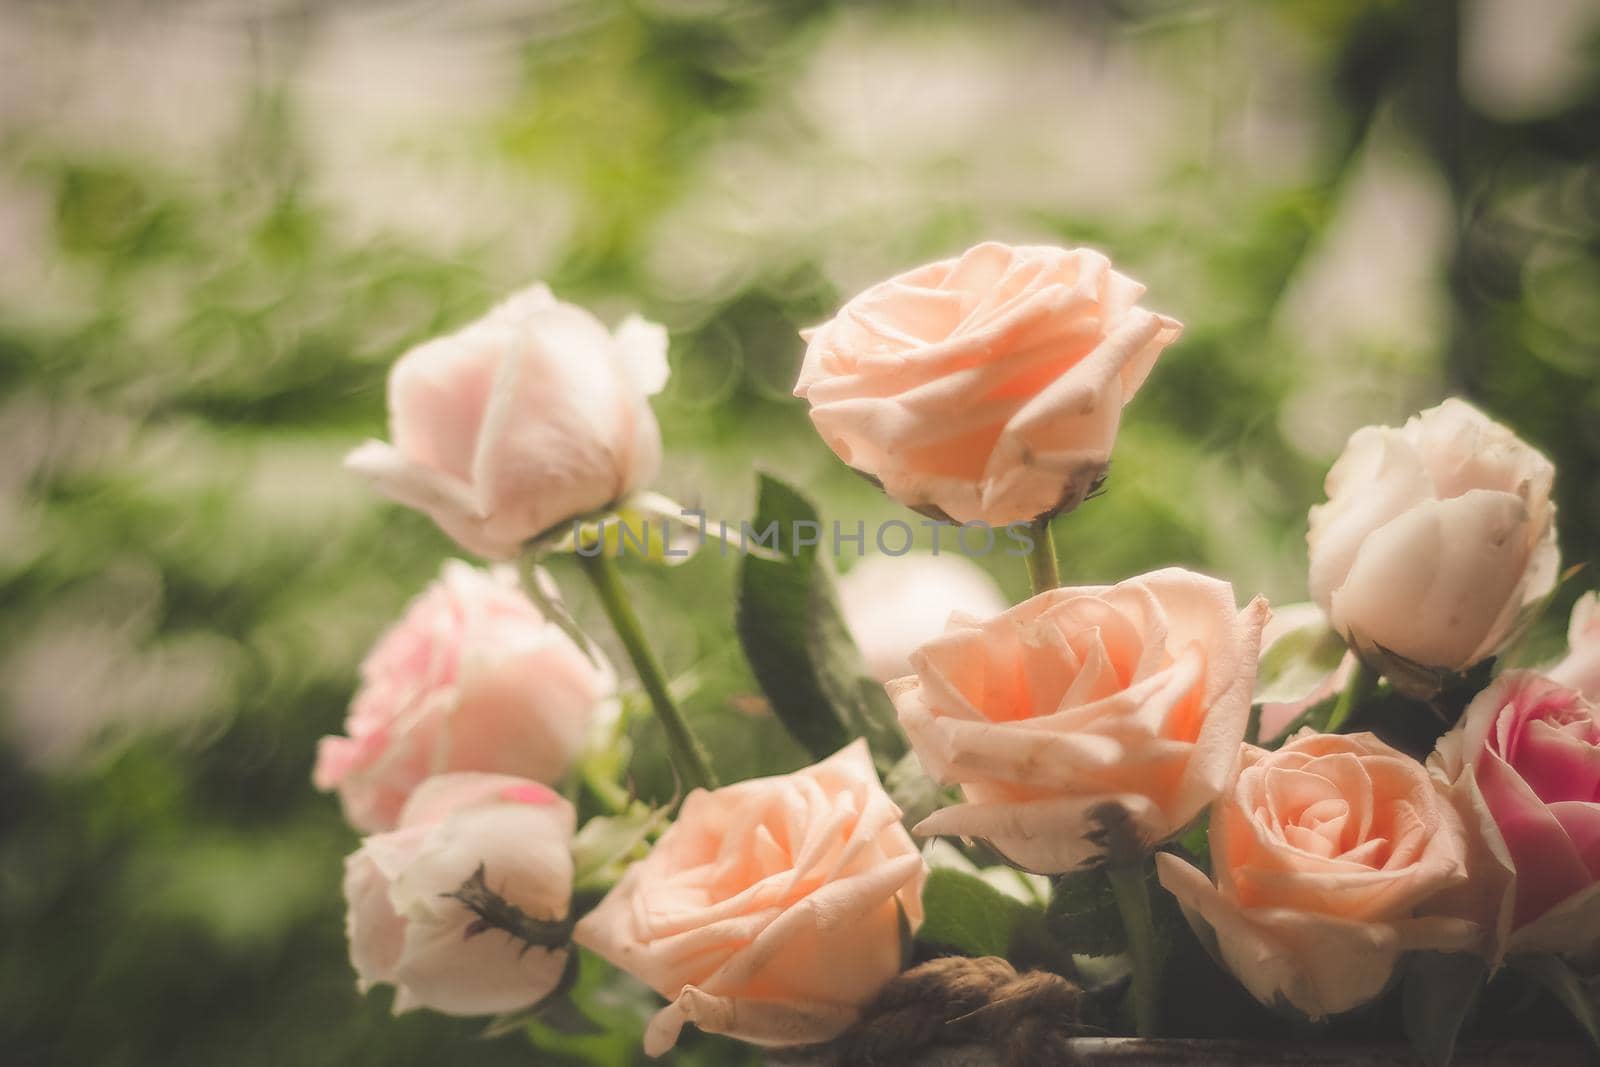 Rose blooming in summer garden. Pink roses flowers growing outdoors by Petrichor